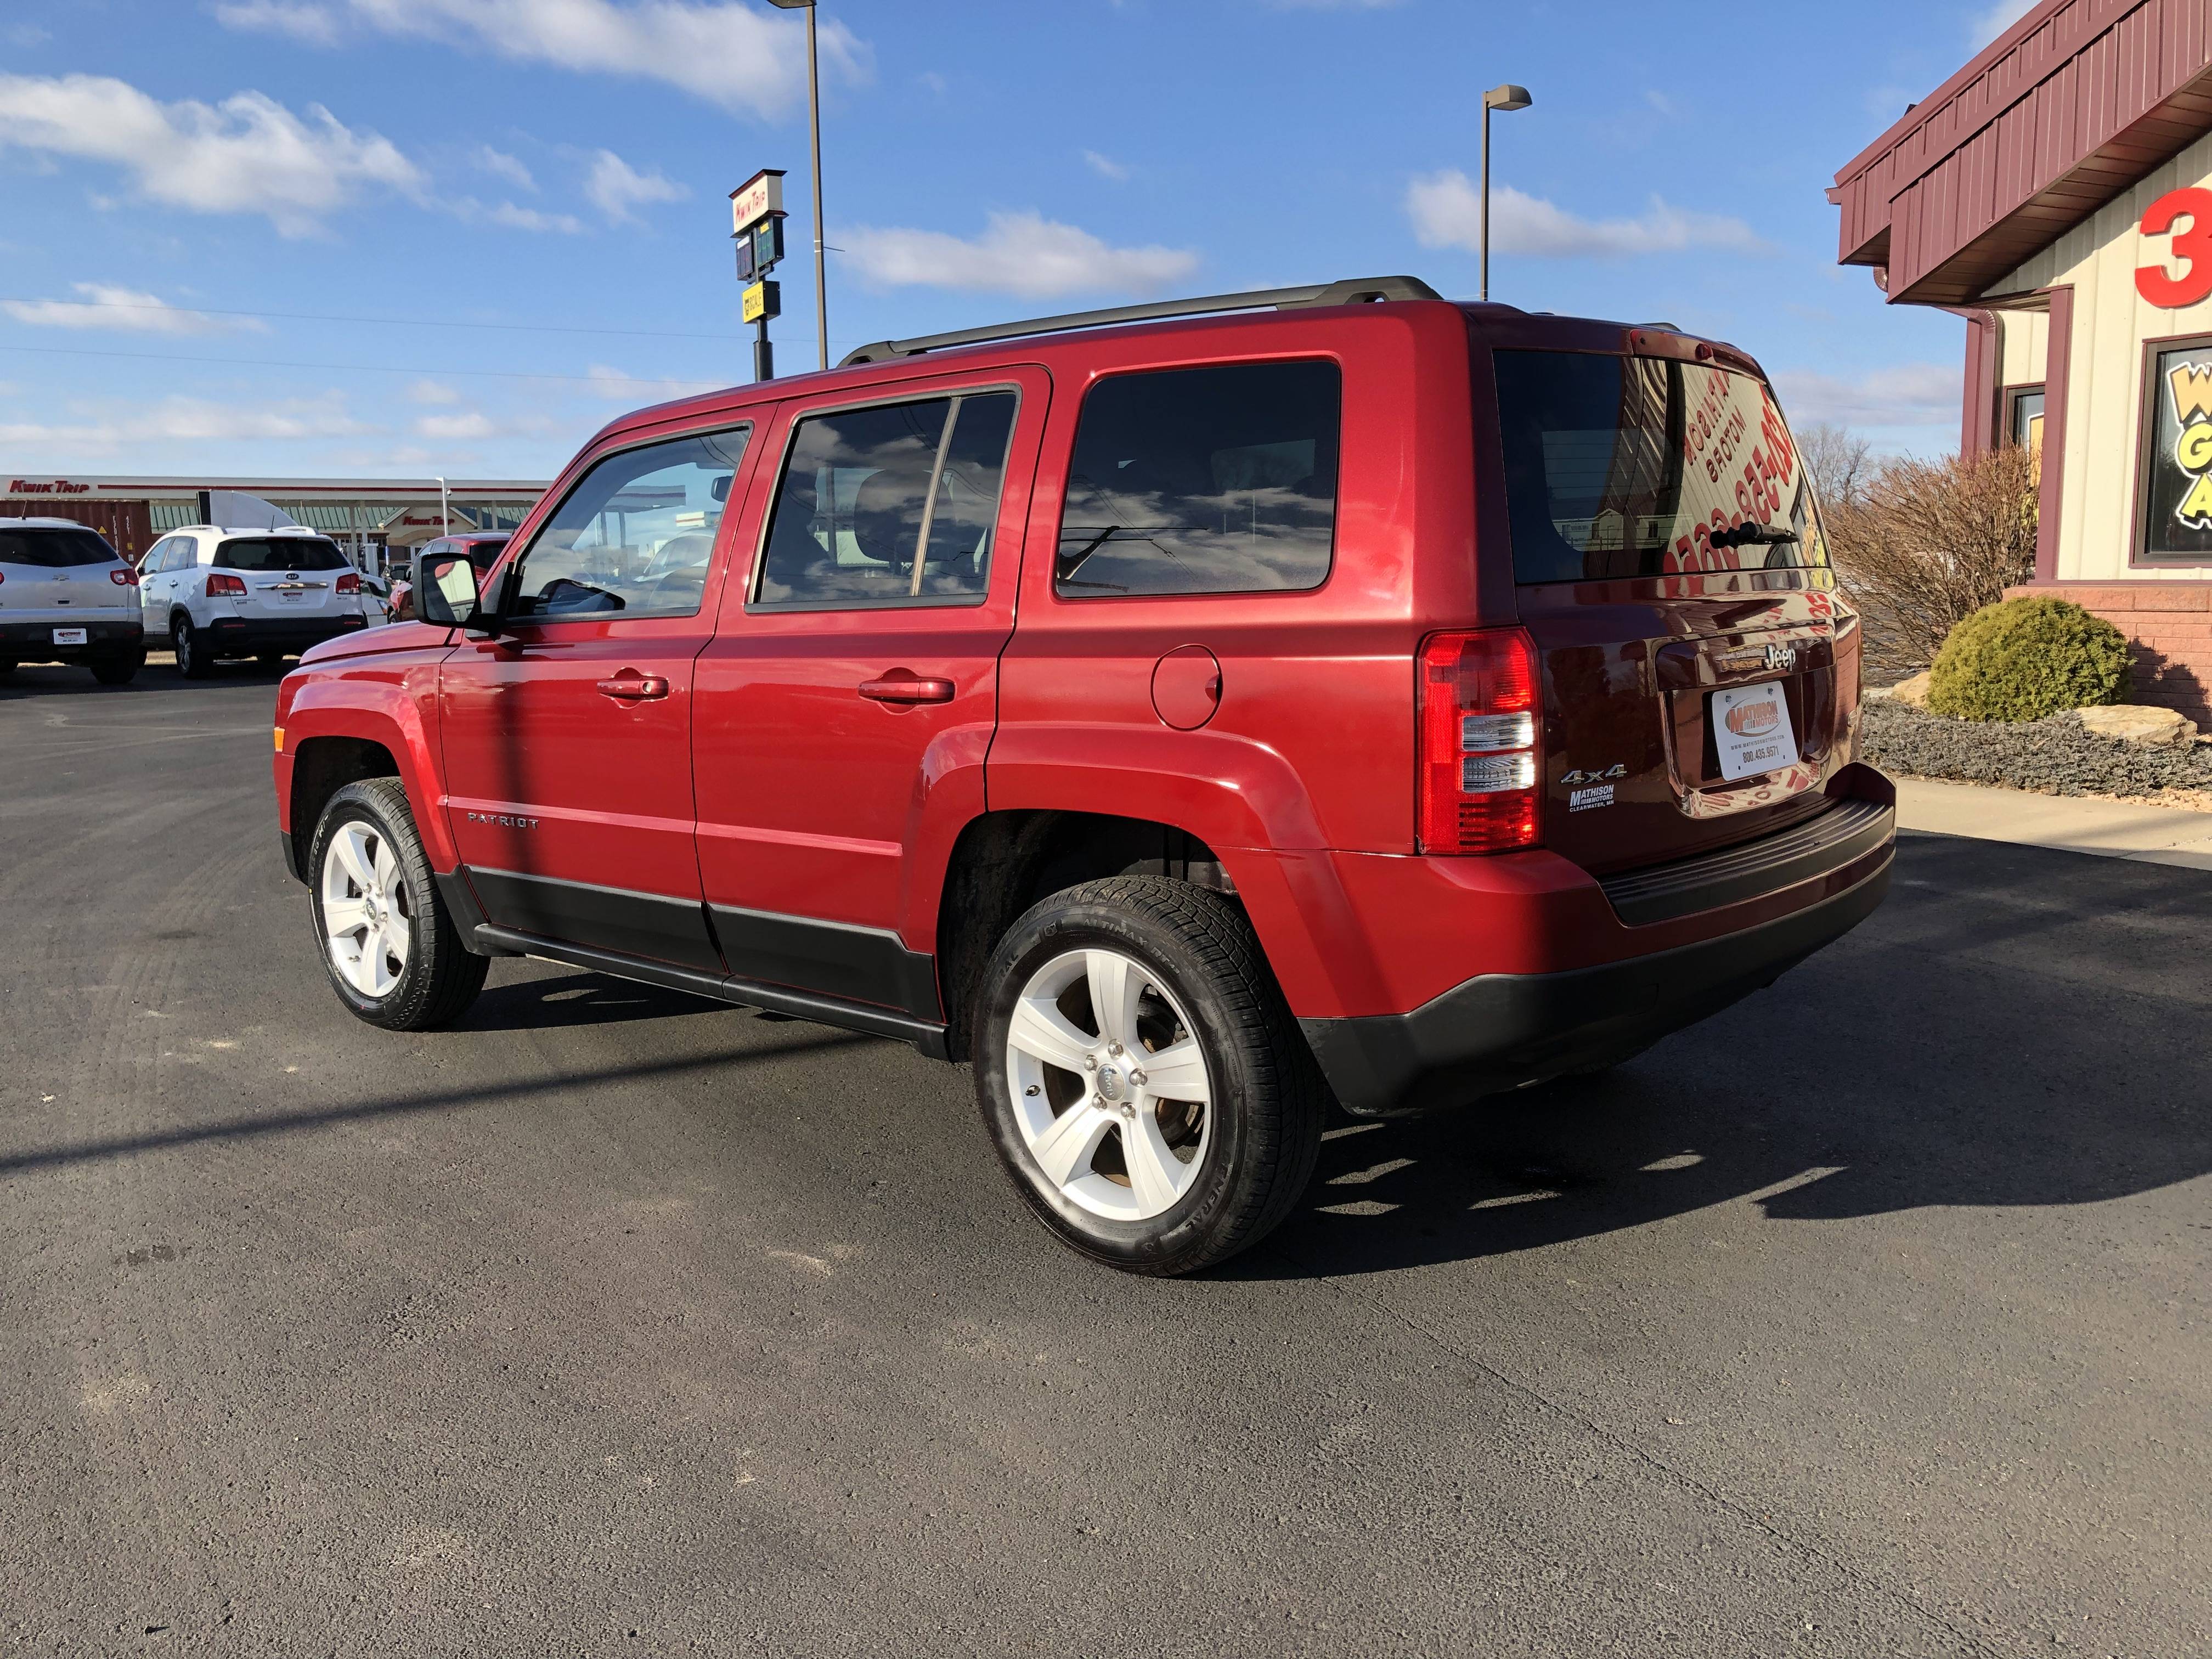 Used 2012 Jeep Patriot LATITUDE for sale in MATHISON